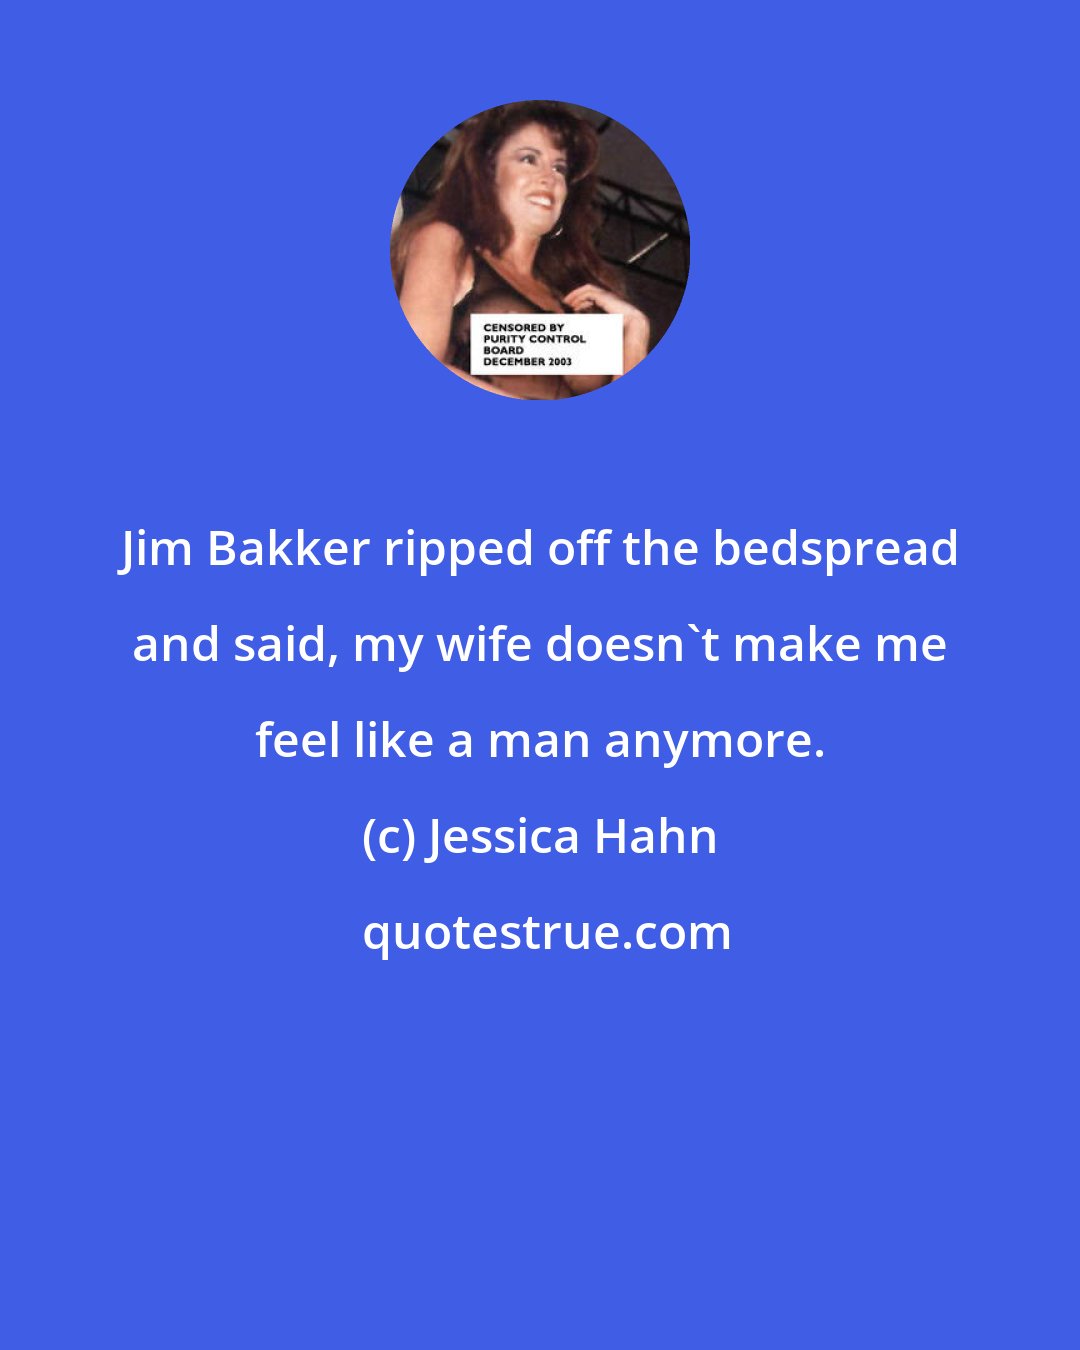 Jessica Hahn: Jim Bakker ripped off the bedspread and said, my wife doesn't make me feel like a man anymore.